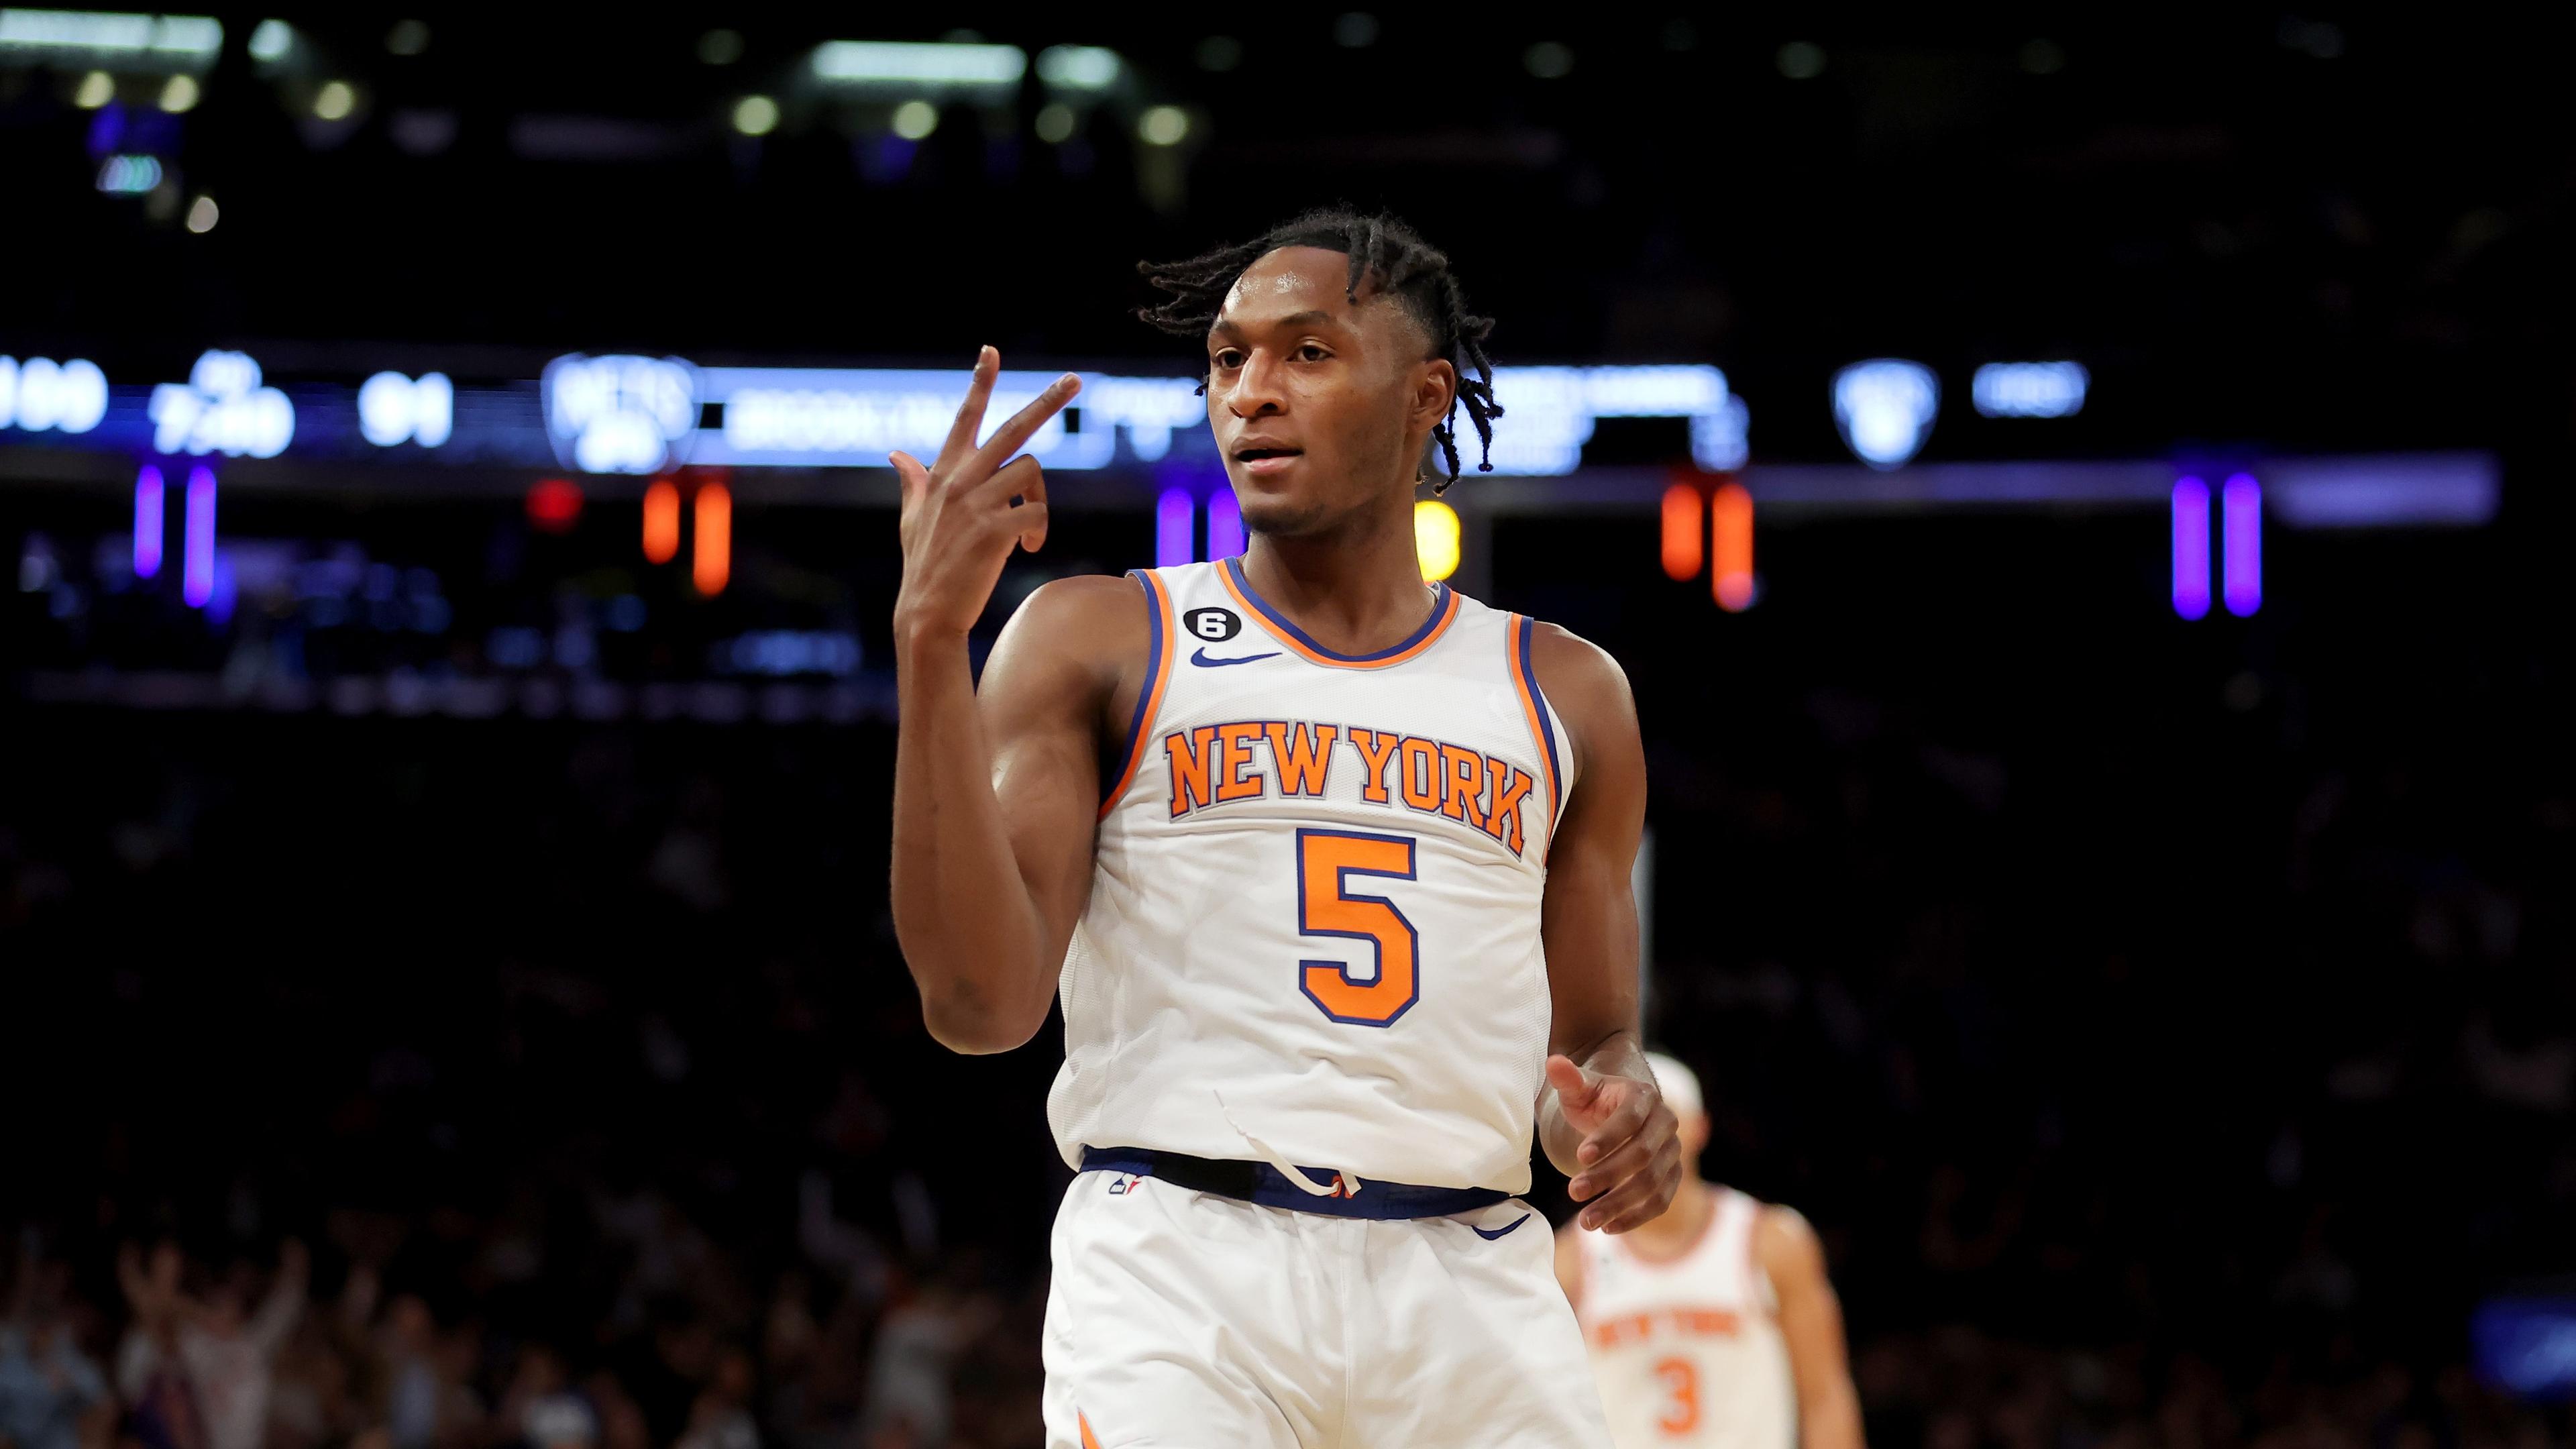 Feb 13, 2023; New York, New York, USA; New York Knicks guard Immanuel Quickley (5) reacts after a three point shot against the Brooklyn Nets during the fourth quarter at Madison Square Garden. Mandatory Credit: Brad Penner-USA TODAY Sports / © Brad Penner-USA TODAY Sports